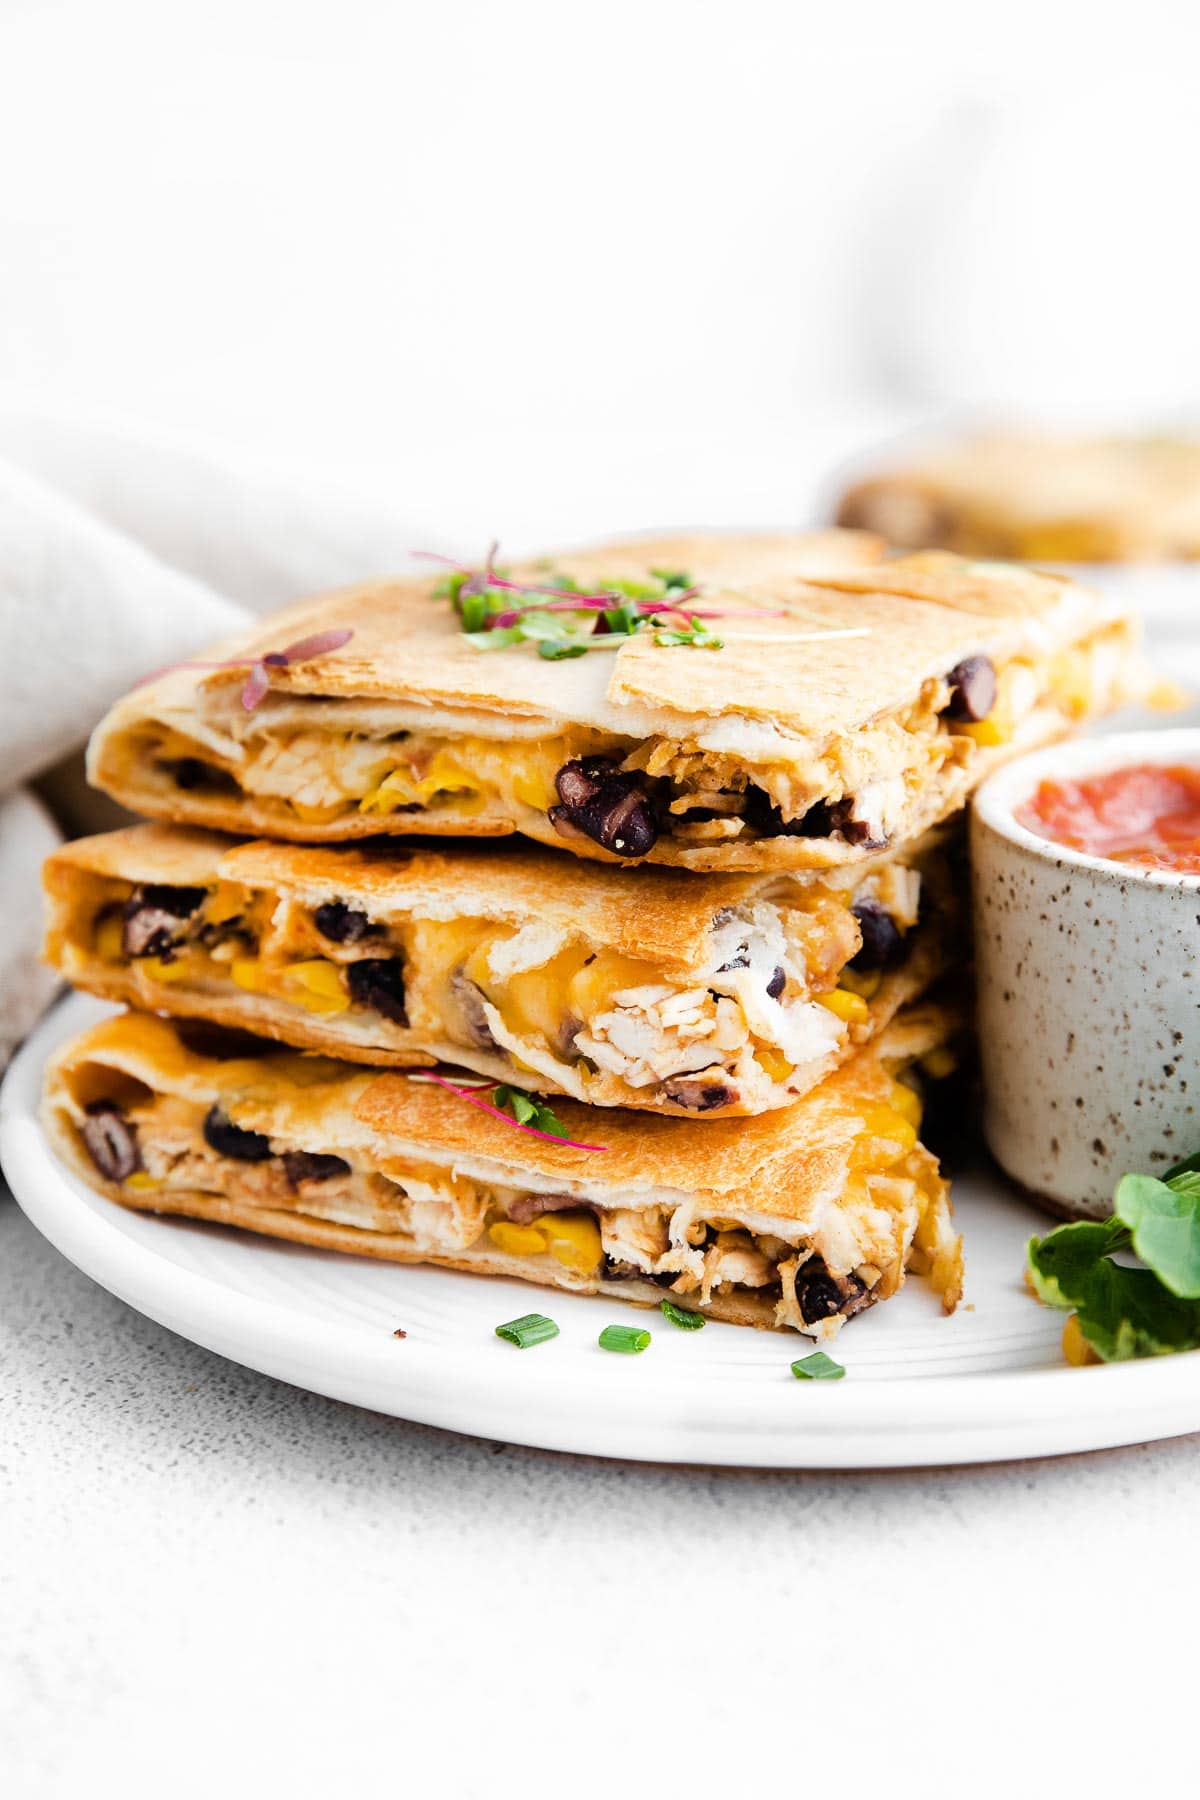 stack of three quesadillas with chicken, cheese, and black beans